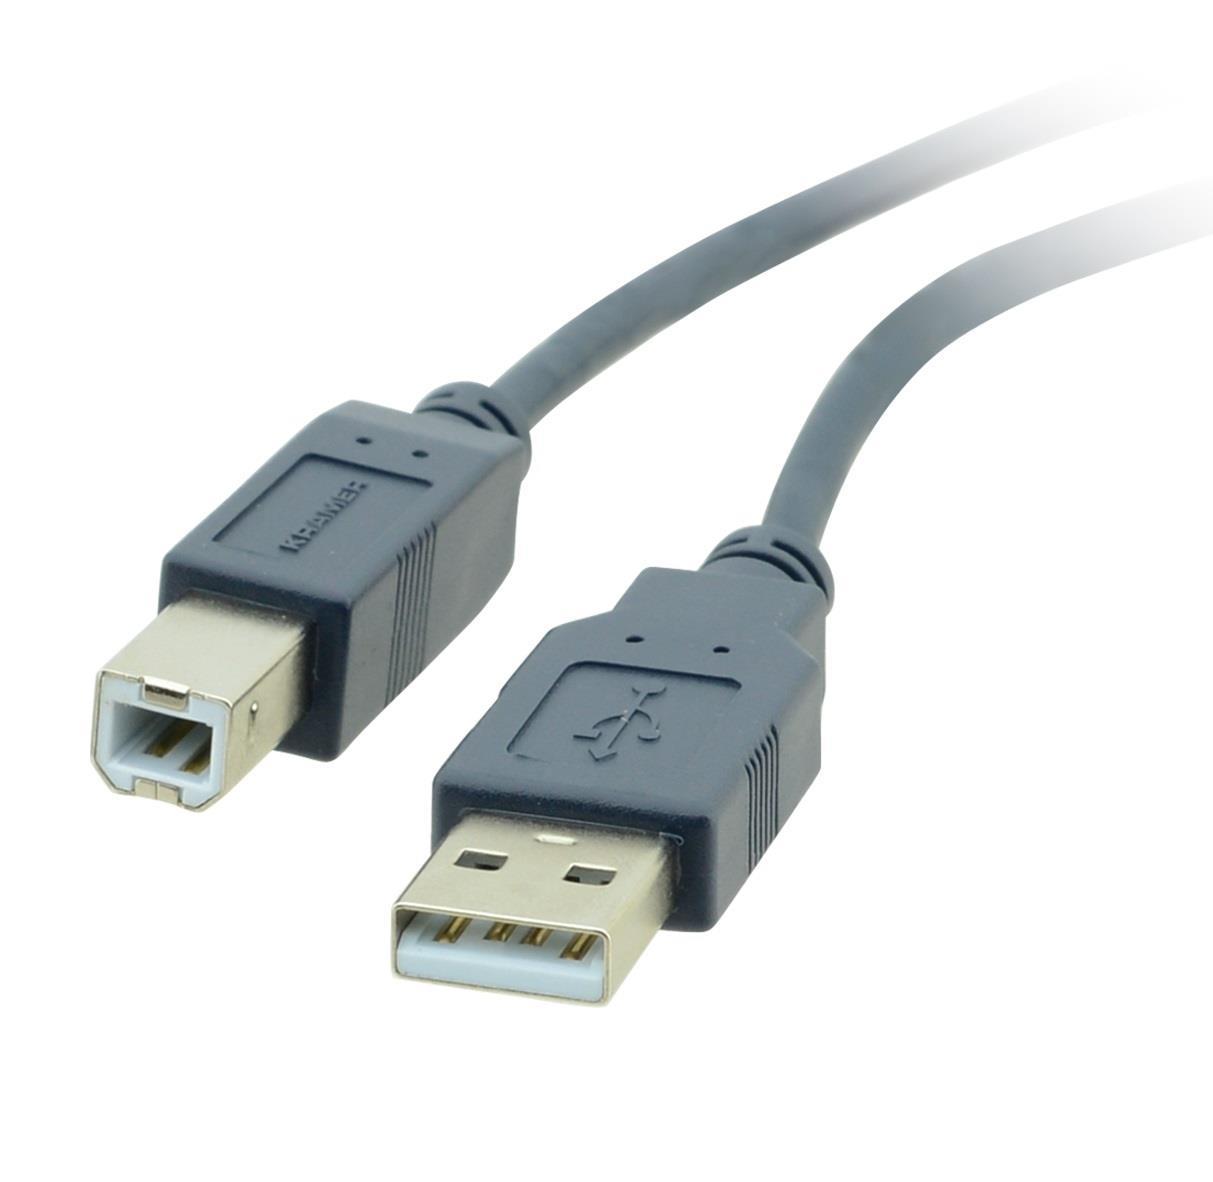 KRAMER C-USB/AB-6 USB 2.0 A(M) TO B(M) CABLE-6FT 1.8M